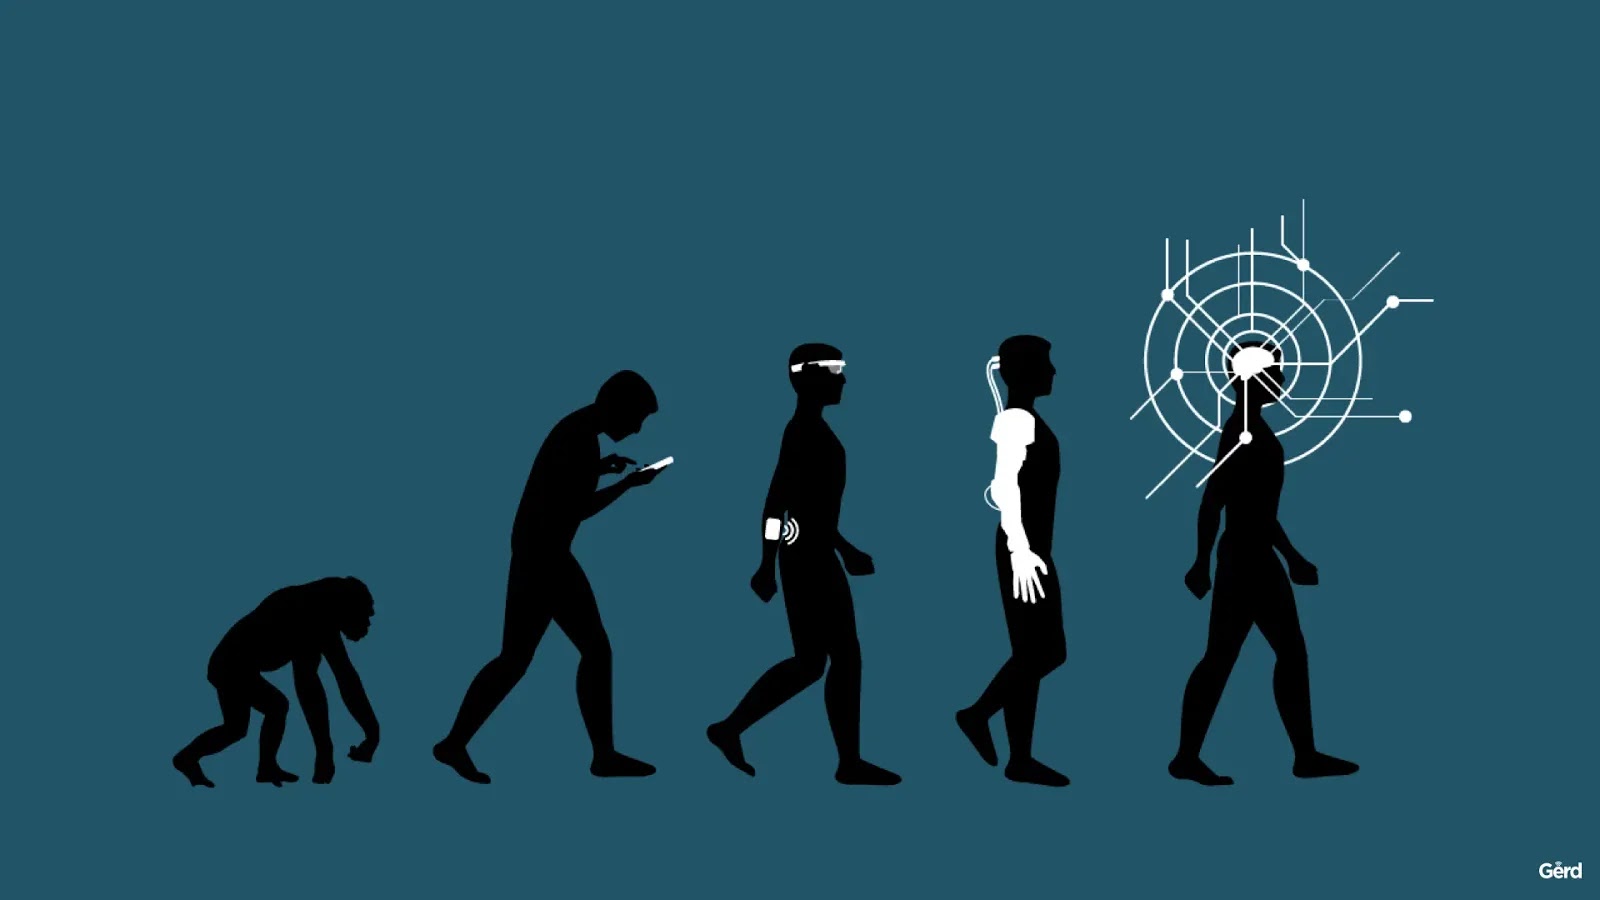 The Evolution Of Technology